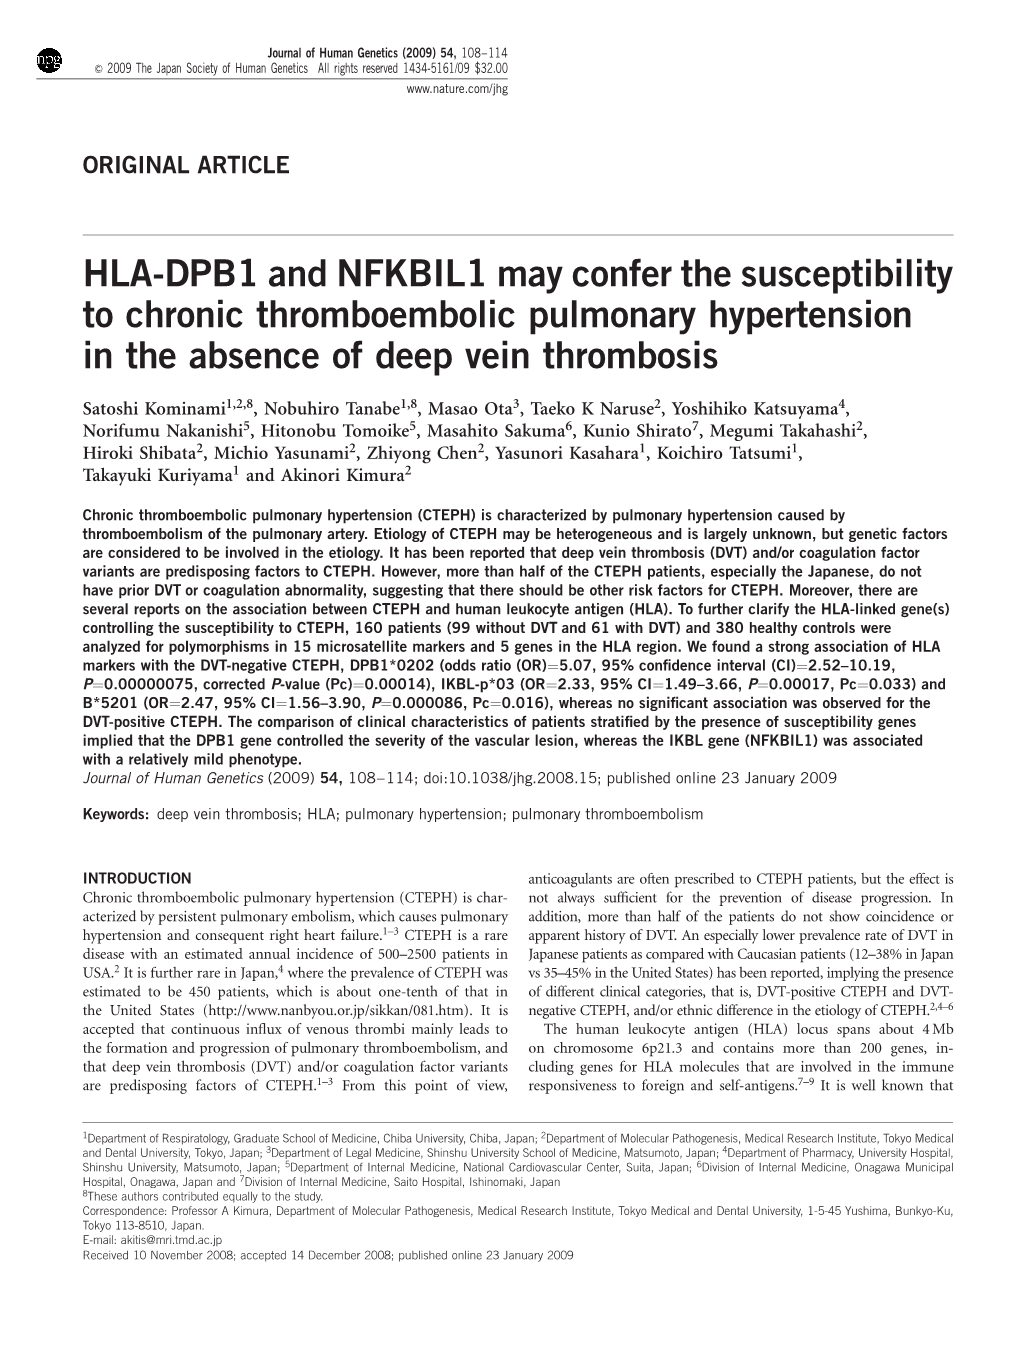 HLA-DPB1 and NFKBIL1 May Confer the Susceptibility to Chronic Thromboembolic Pulmonary Hypertension in the Absence of Deep Vein Thrombosis